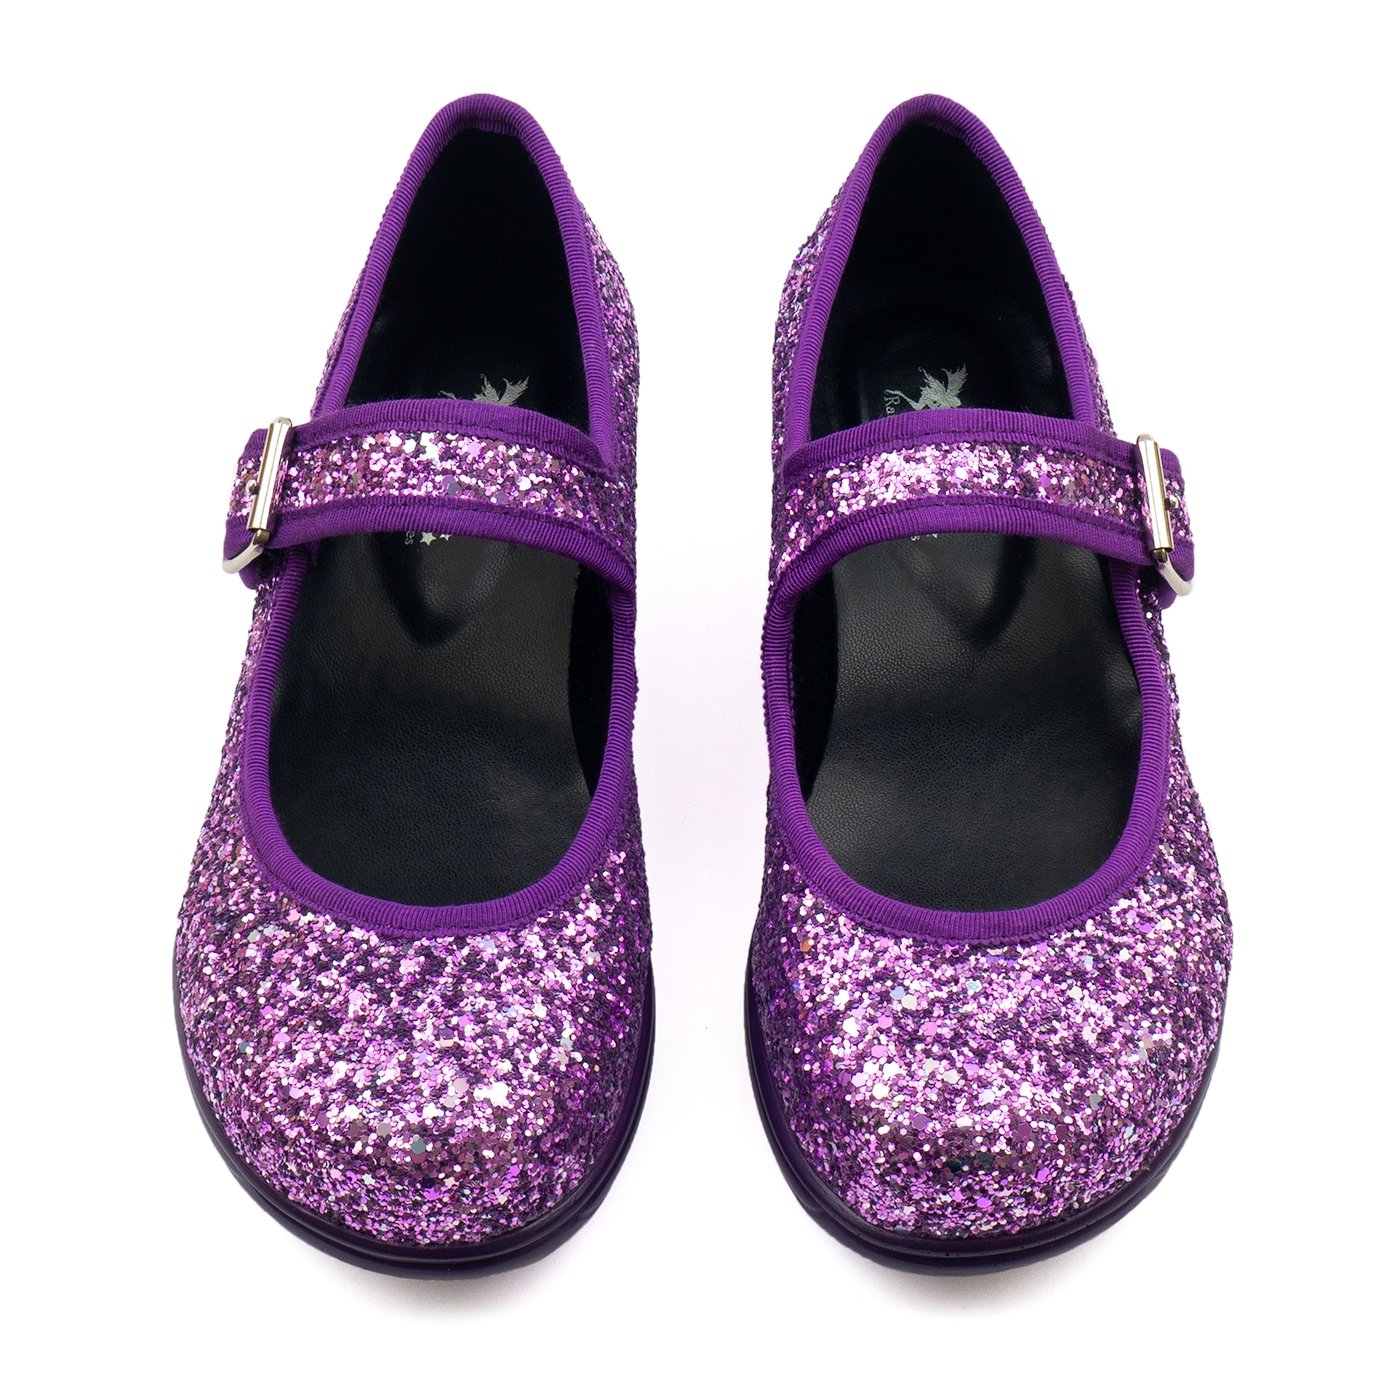 Mary Jane - Amethyst - Rockamilly-Shoes-Vintage